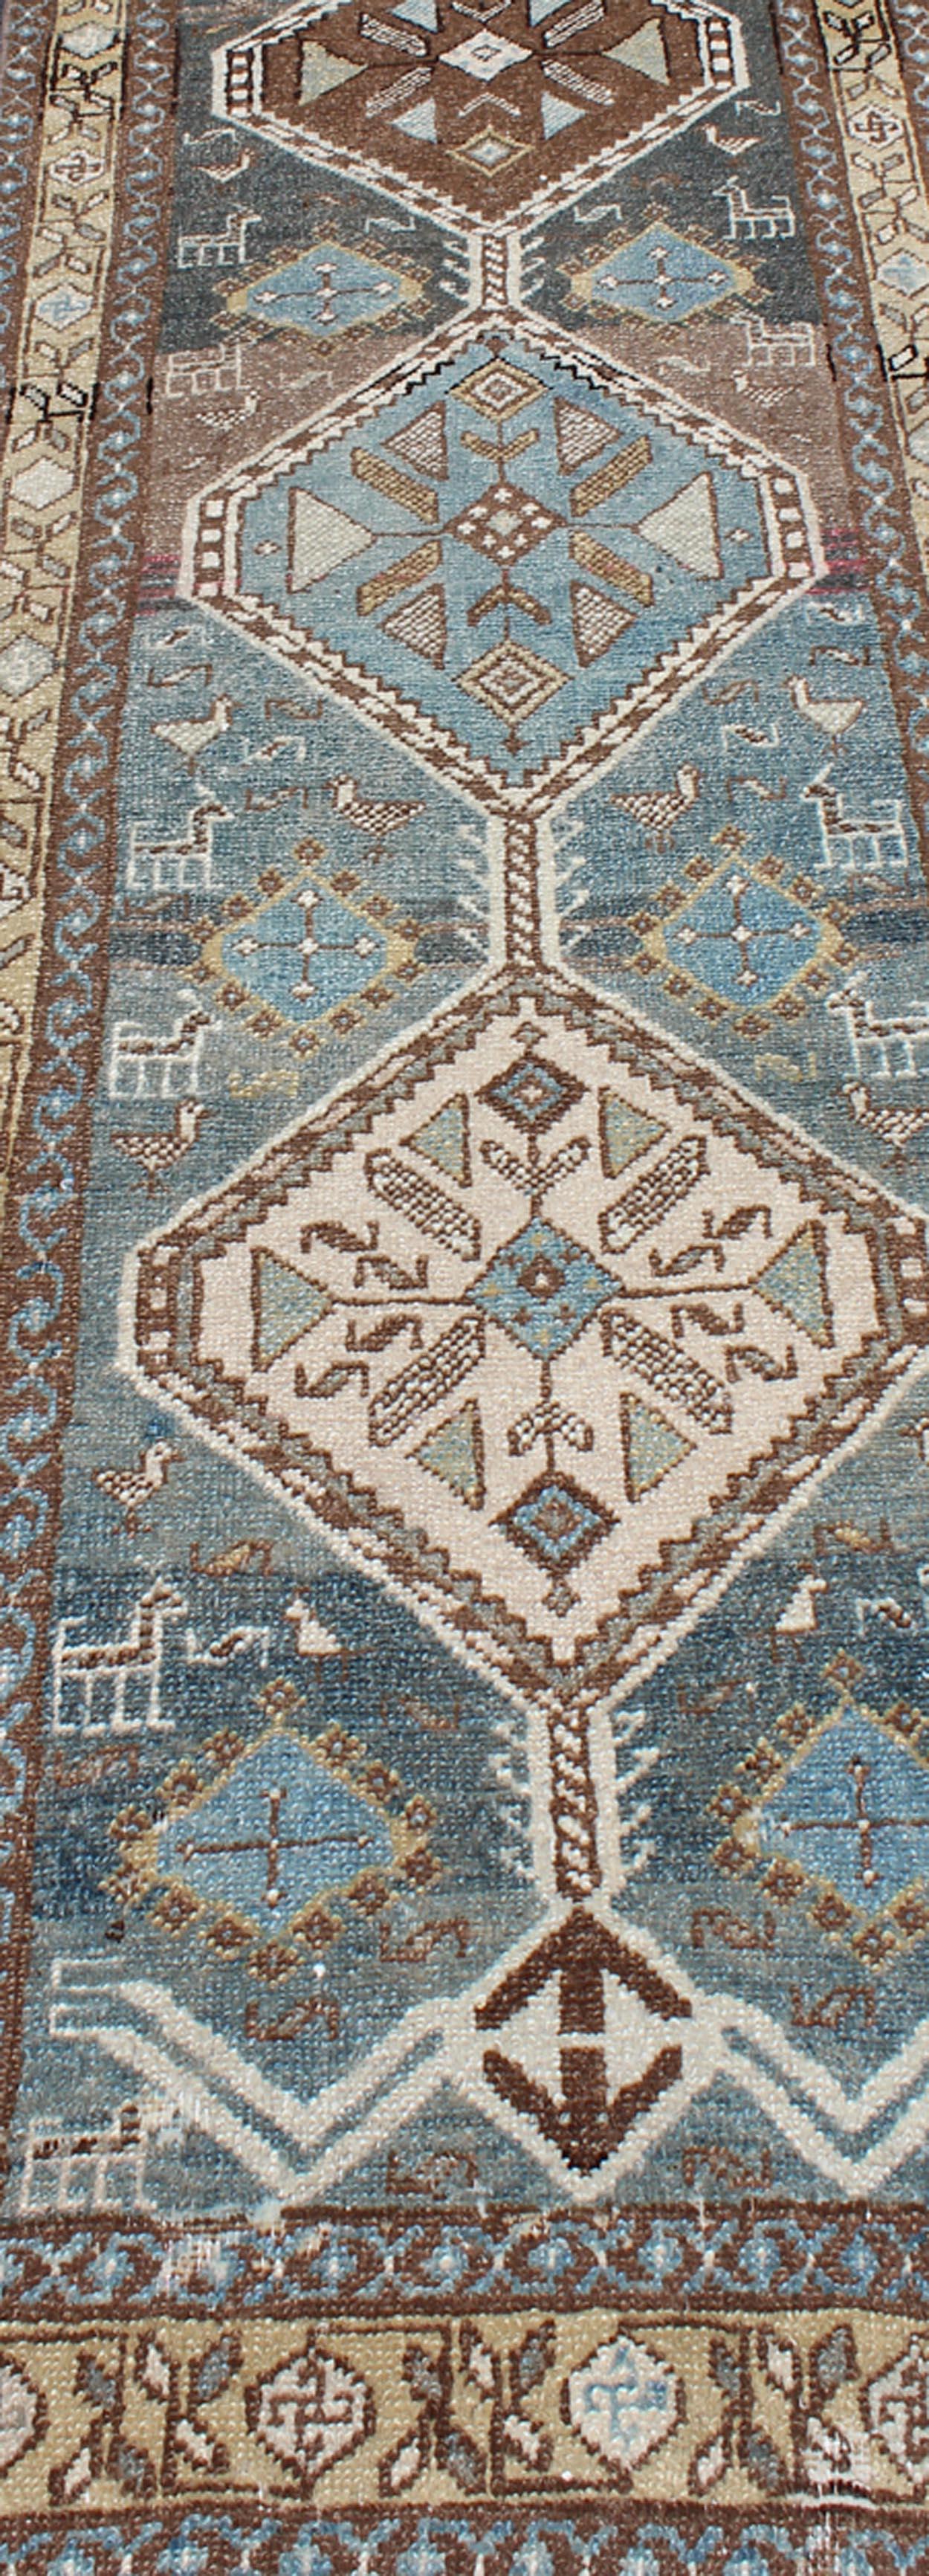 Shades of Blue and Gray Antique Persian Heriz Long Runner with Geometric Design For Sale 4